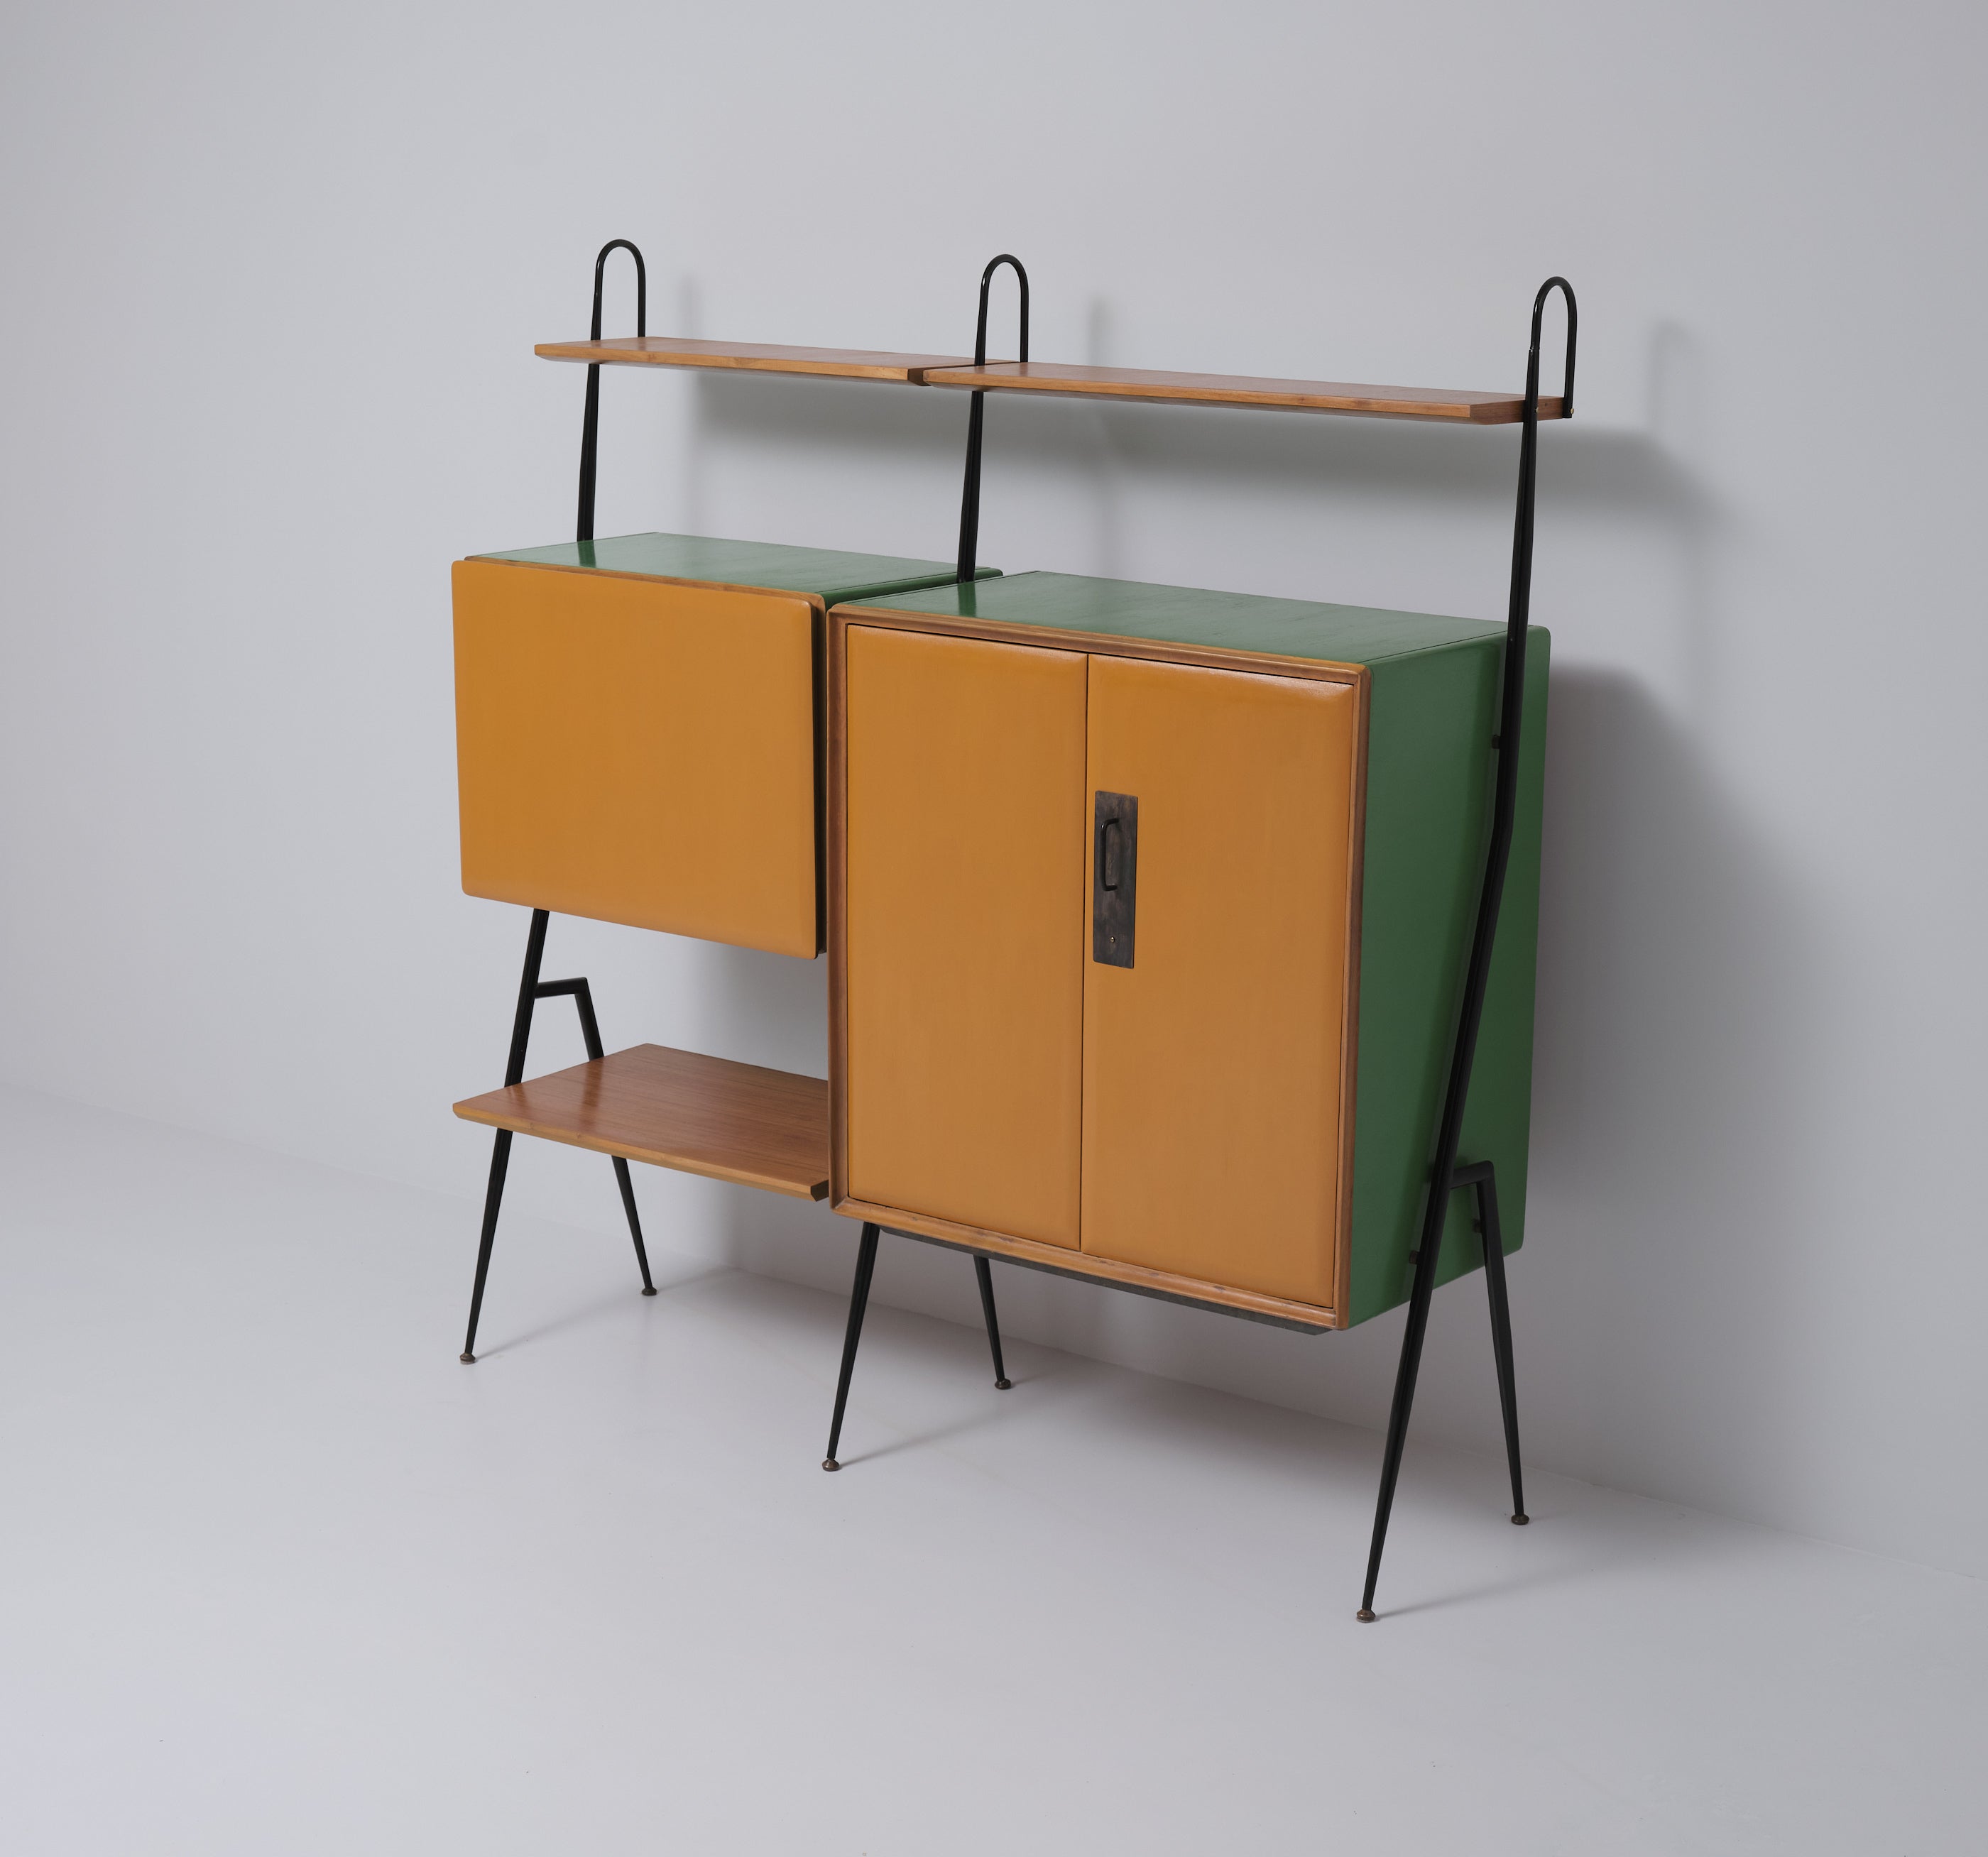 Explore this exquisite modular bookcase, a testament to Italian design excellence by Silvio Cavatorta, creatively improved by RETRO4M. This self-standing wall unit is a true embodiment of mid-century sophistication.

Completely restored to its